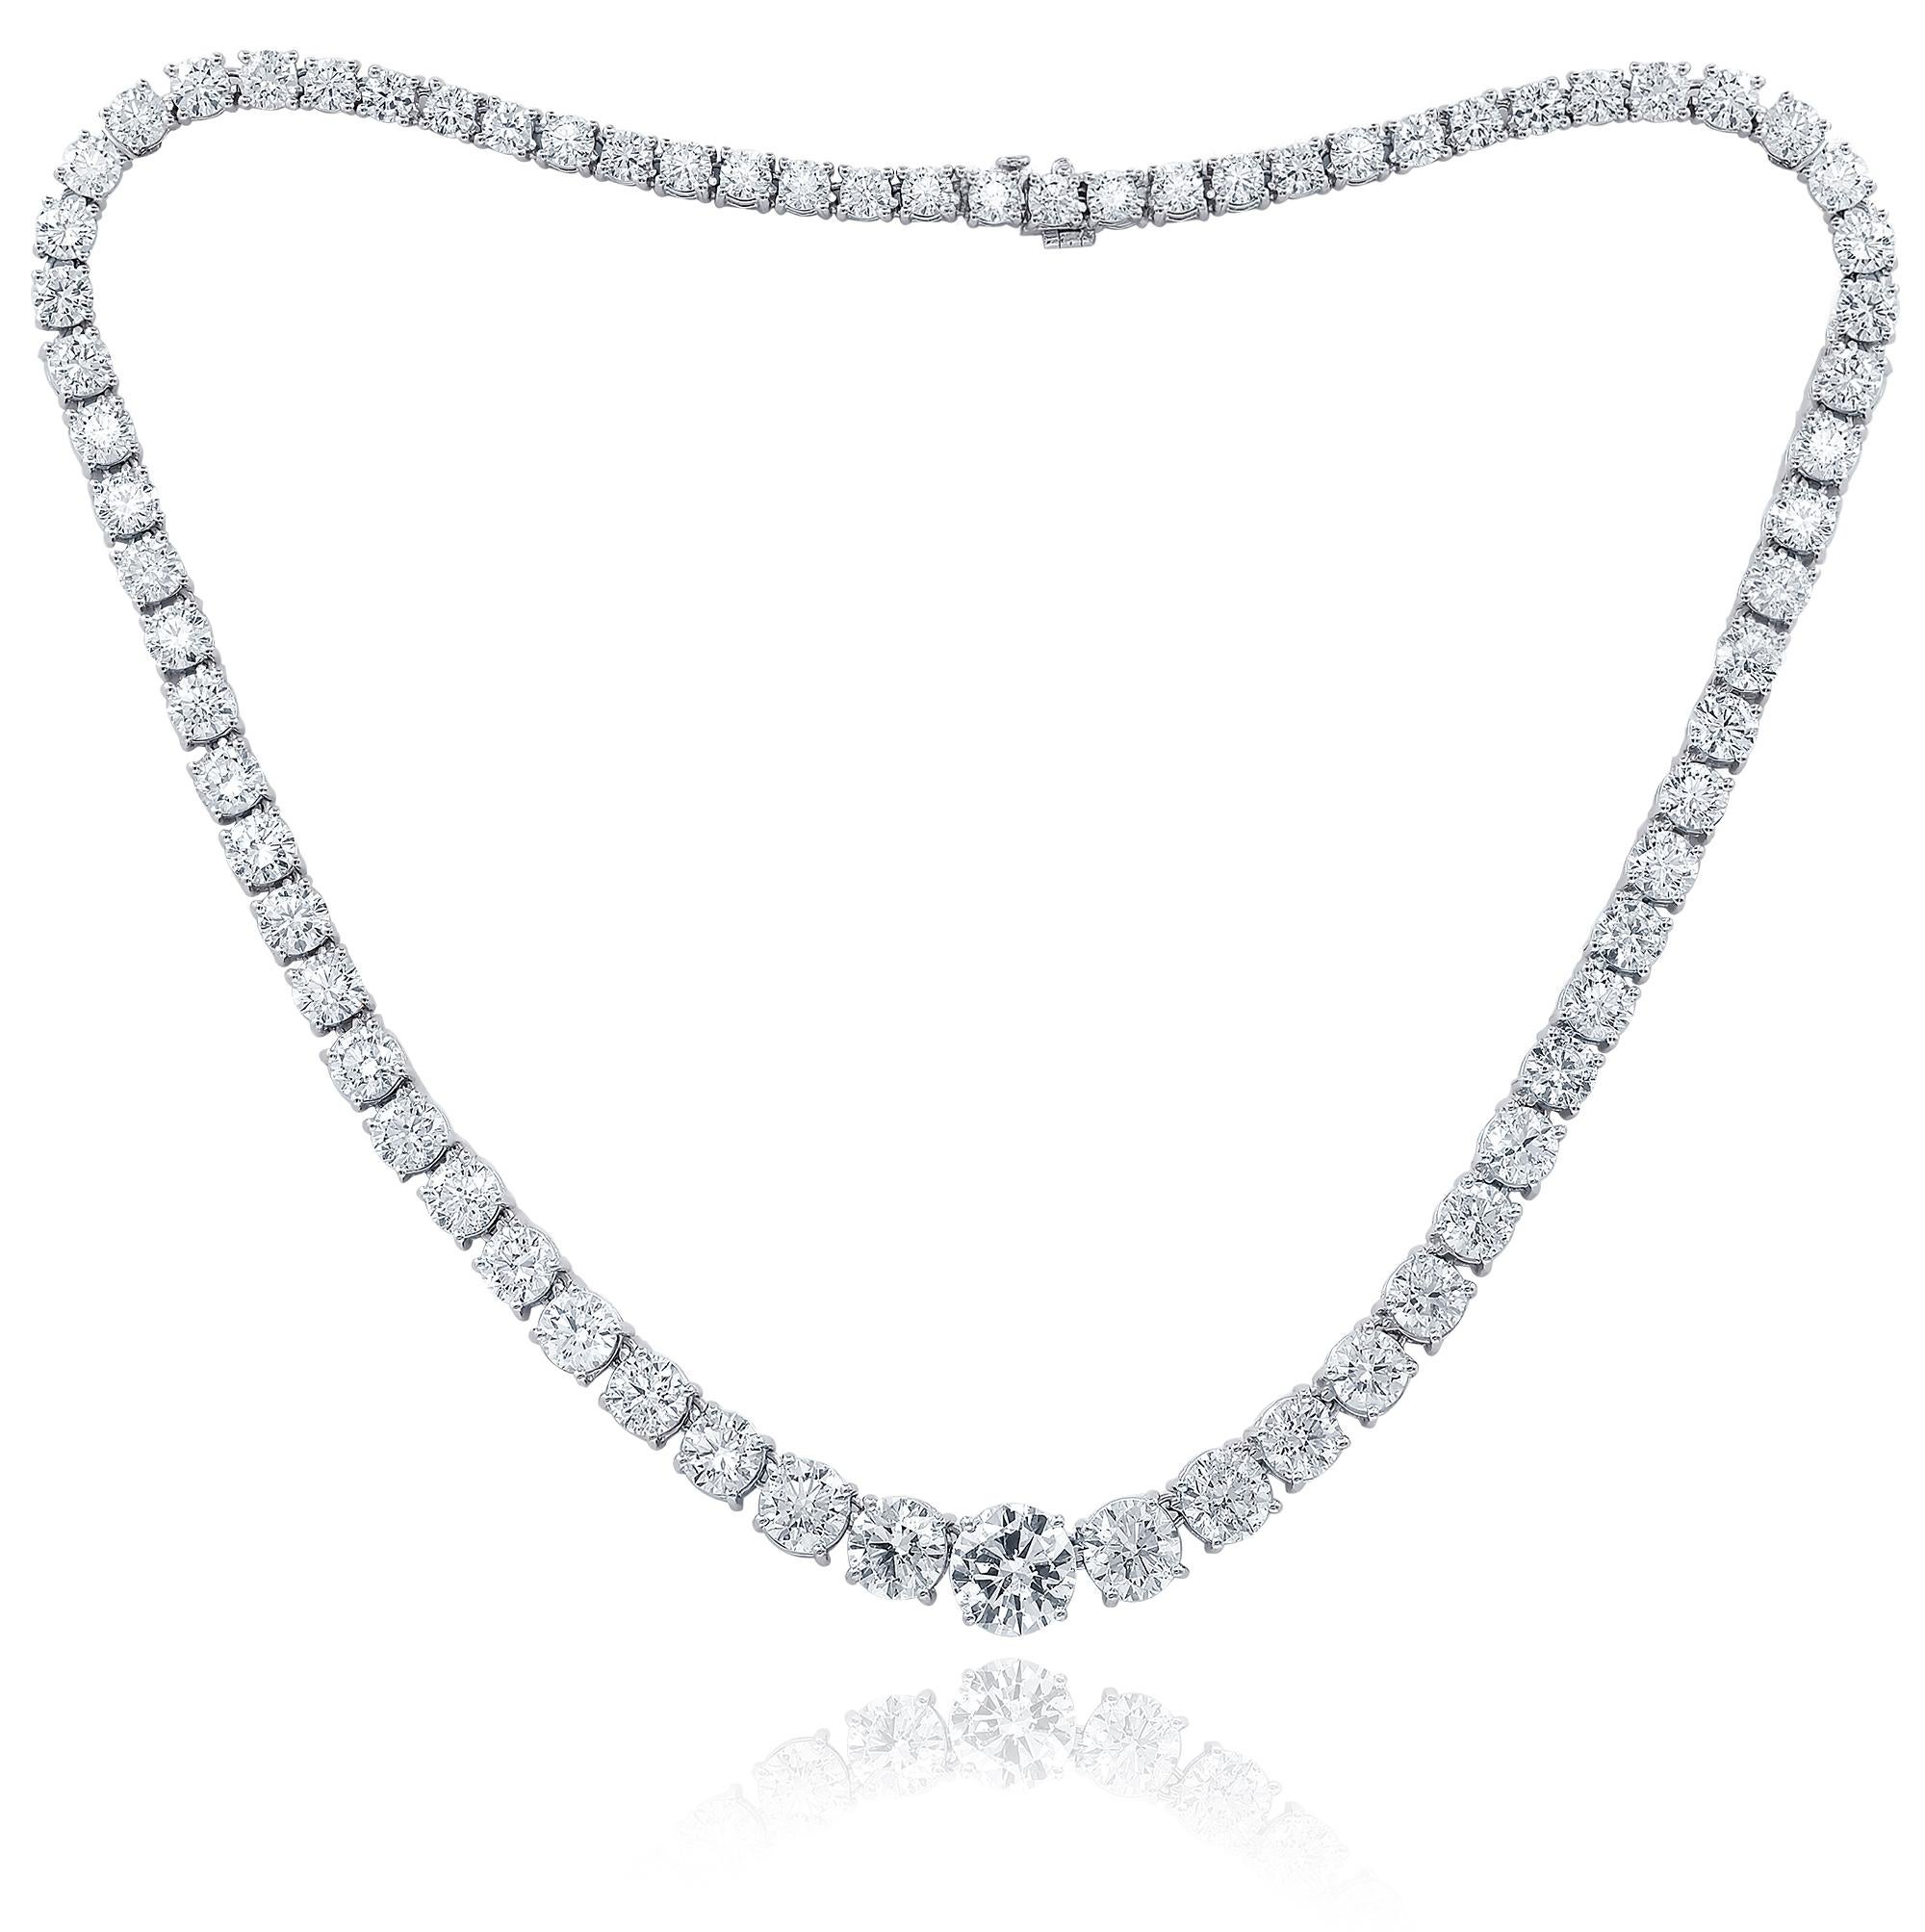 Dazzling Diamond Riviera Necklace set with 45.49cts 73 stones total 
All GIA Certified Near colorless white in color flawless to SI clarity 